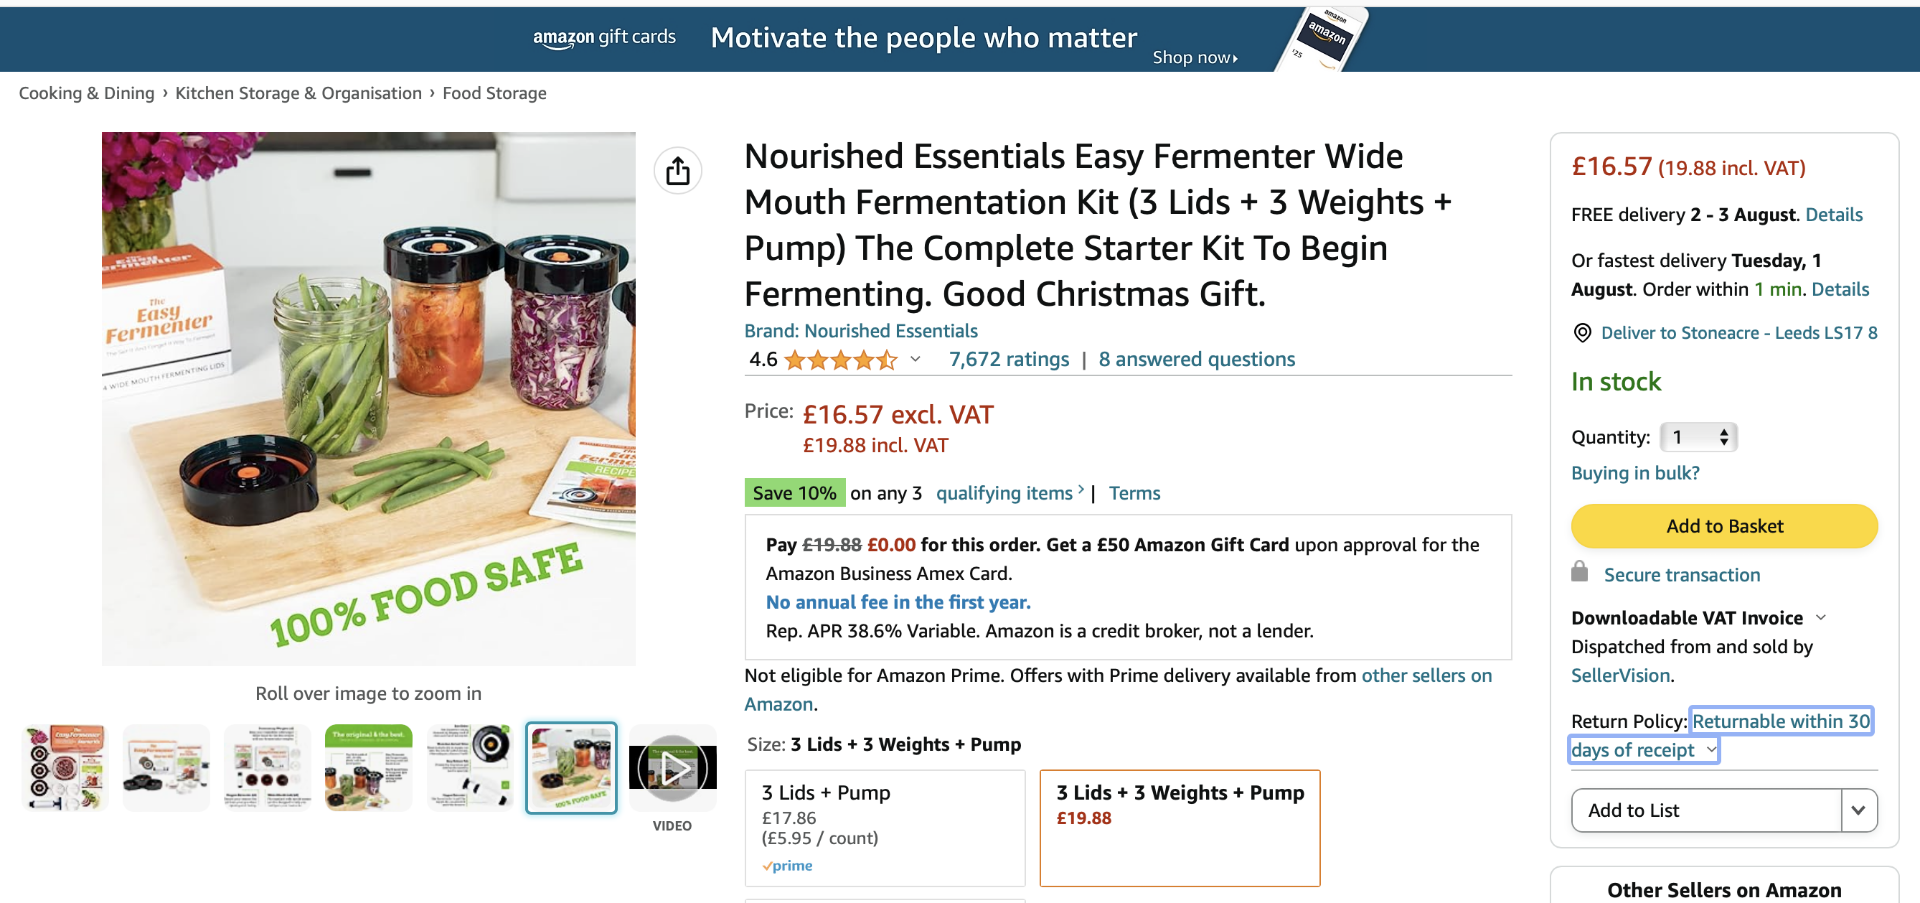 10 x Nourished Essentials Easy Fermenter Wide Mouth Fermentation Kit & Accessories - RRP £198.80 ! - Image 2 of 5